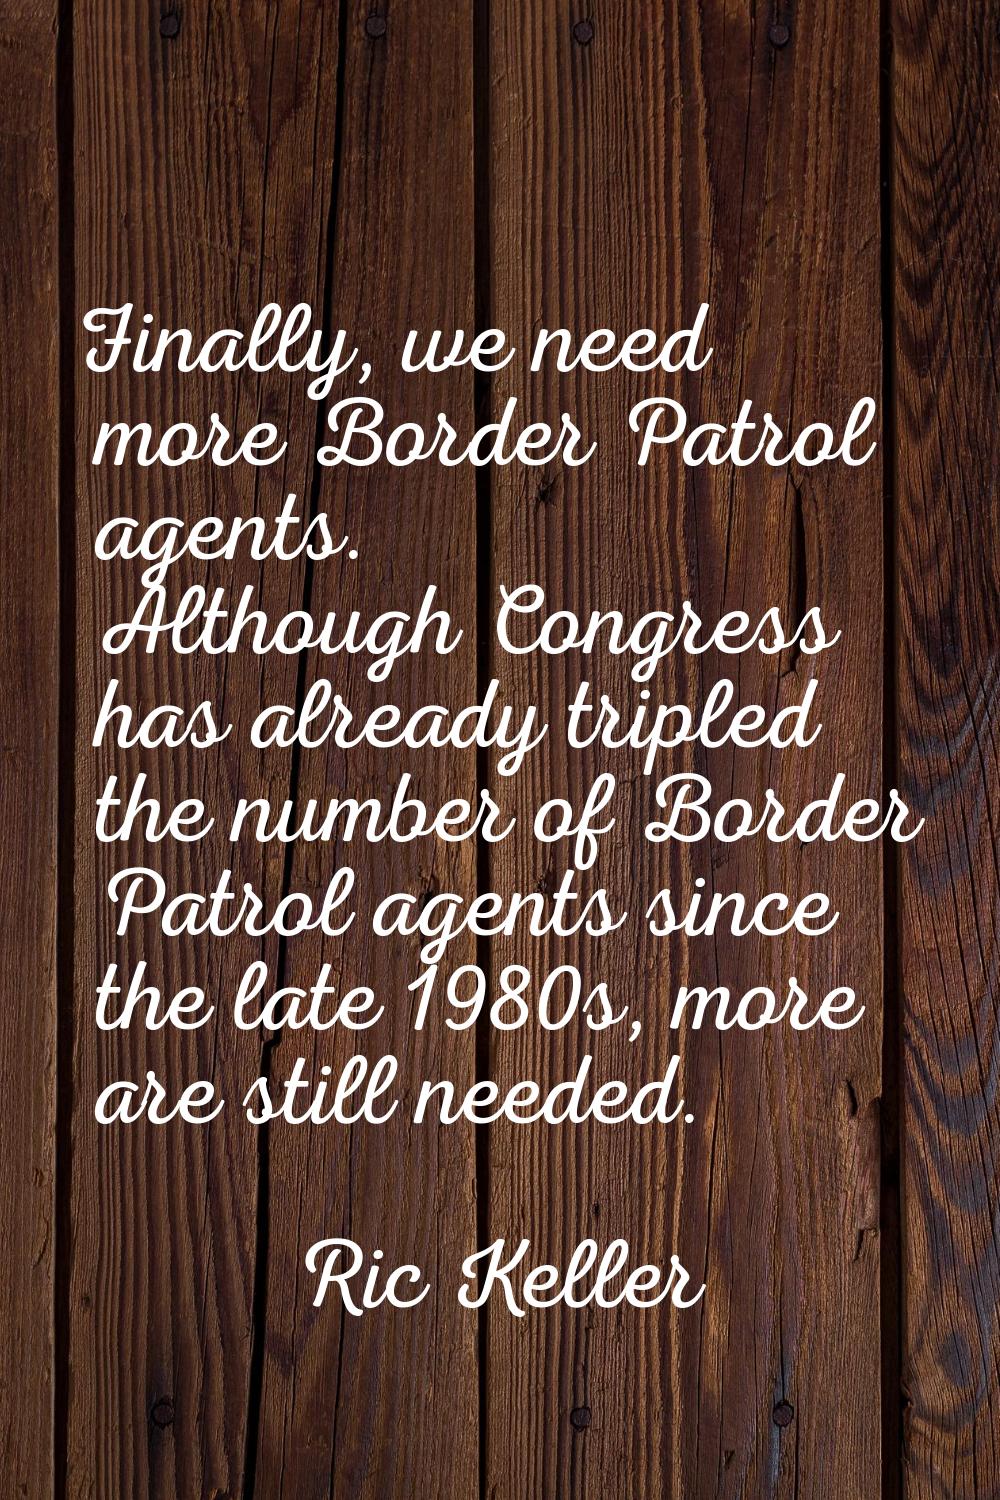 Finally, we need more Border Patrol agents. Although Congress has already tripled the number of Bor